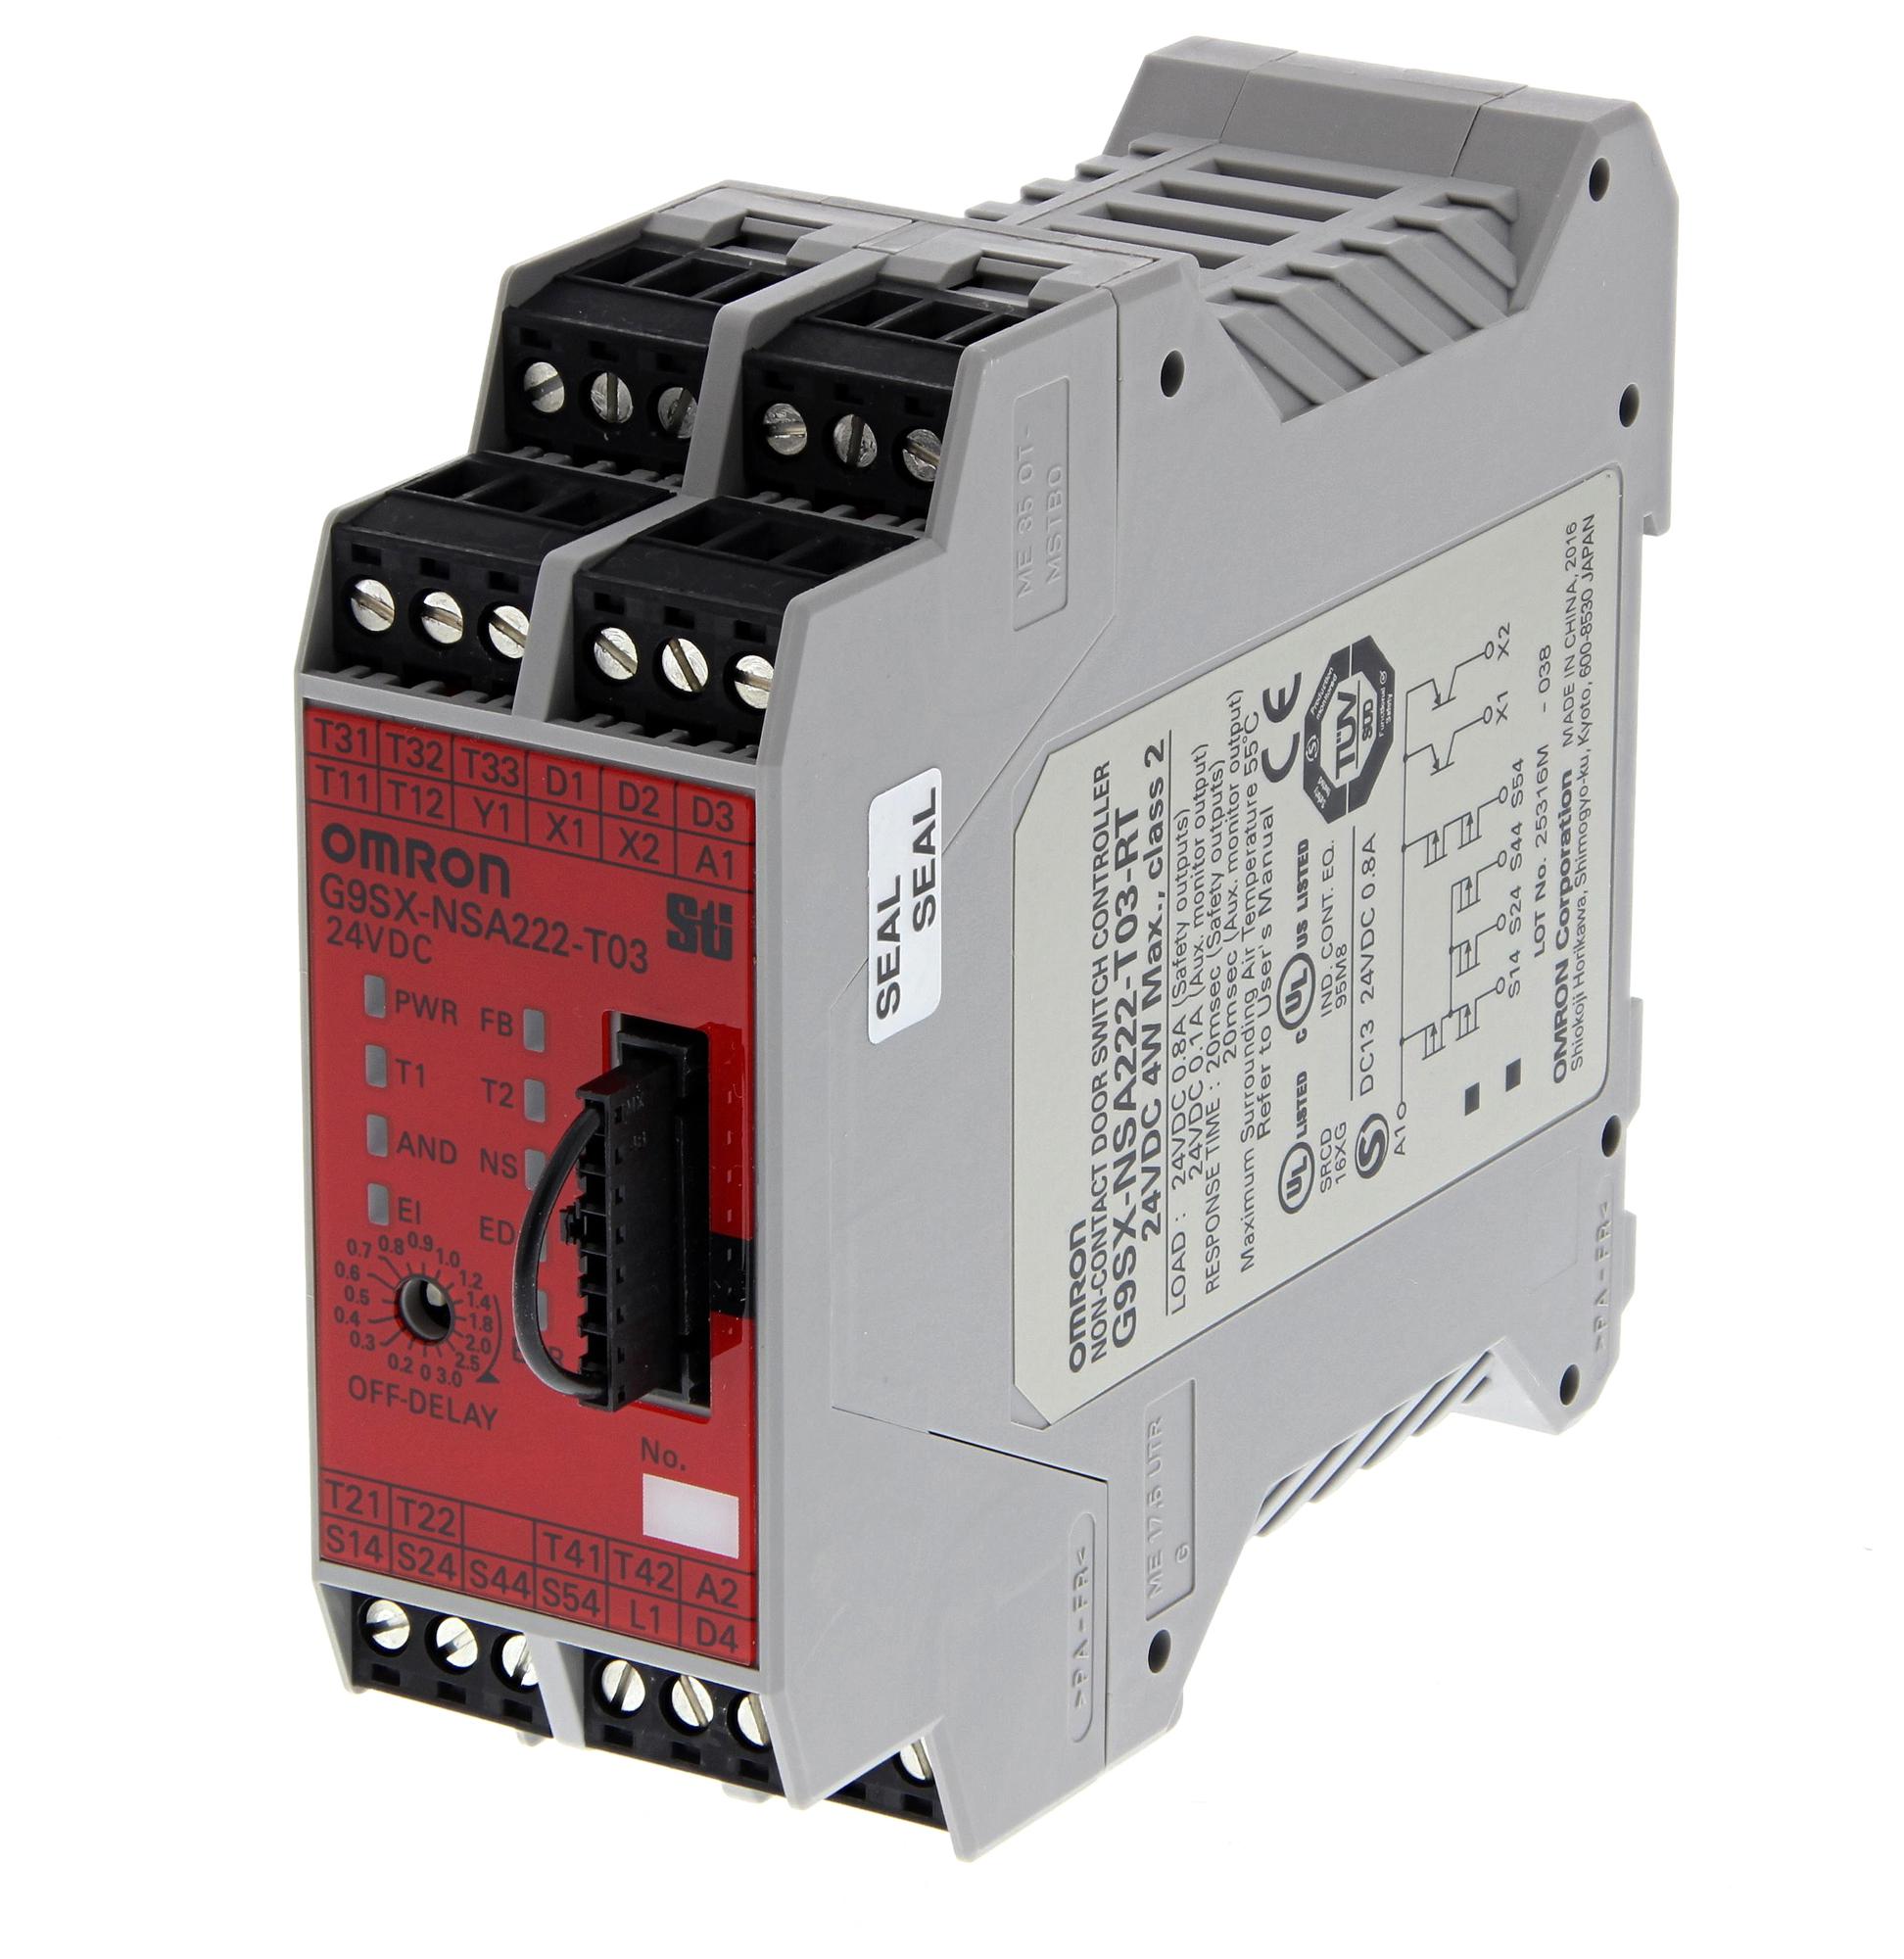 G9SX-NSA222-T03-RT  DC24 SAFETY RELAYS OMRON